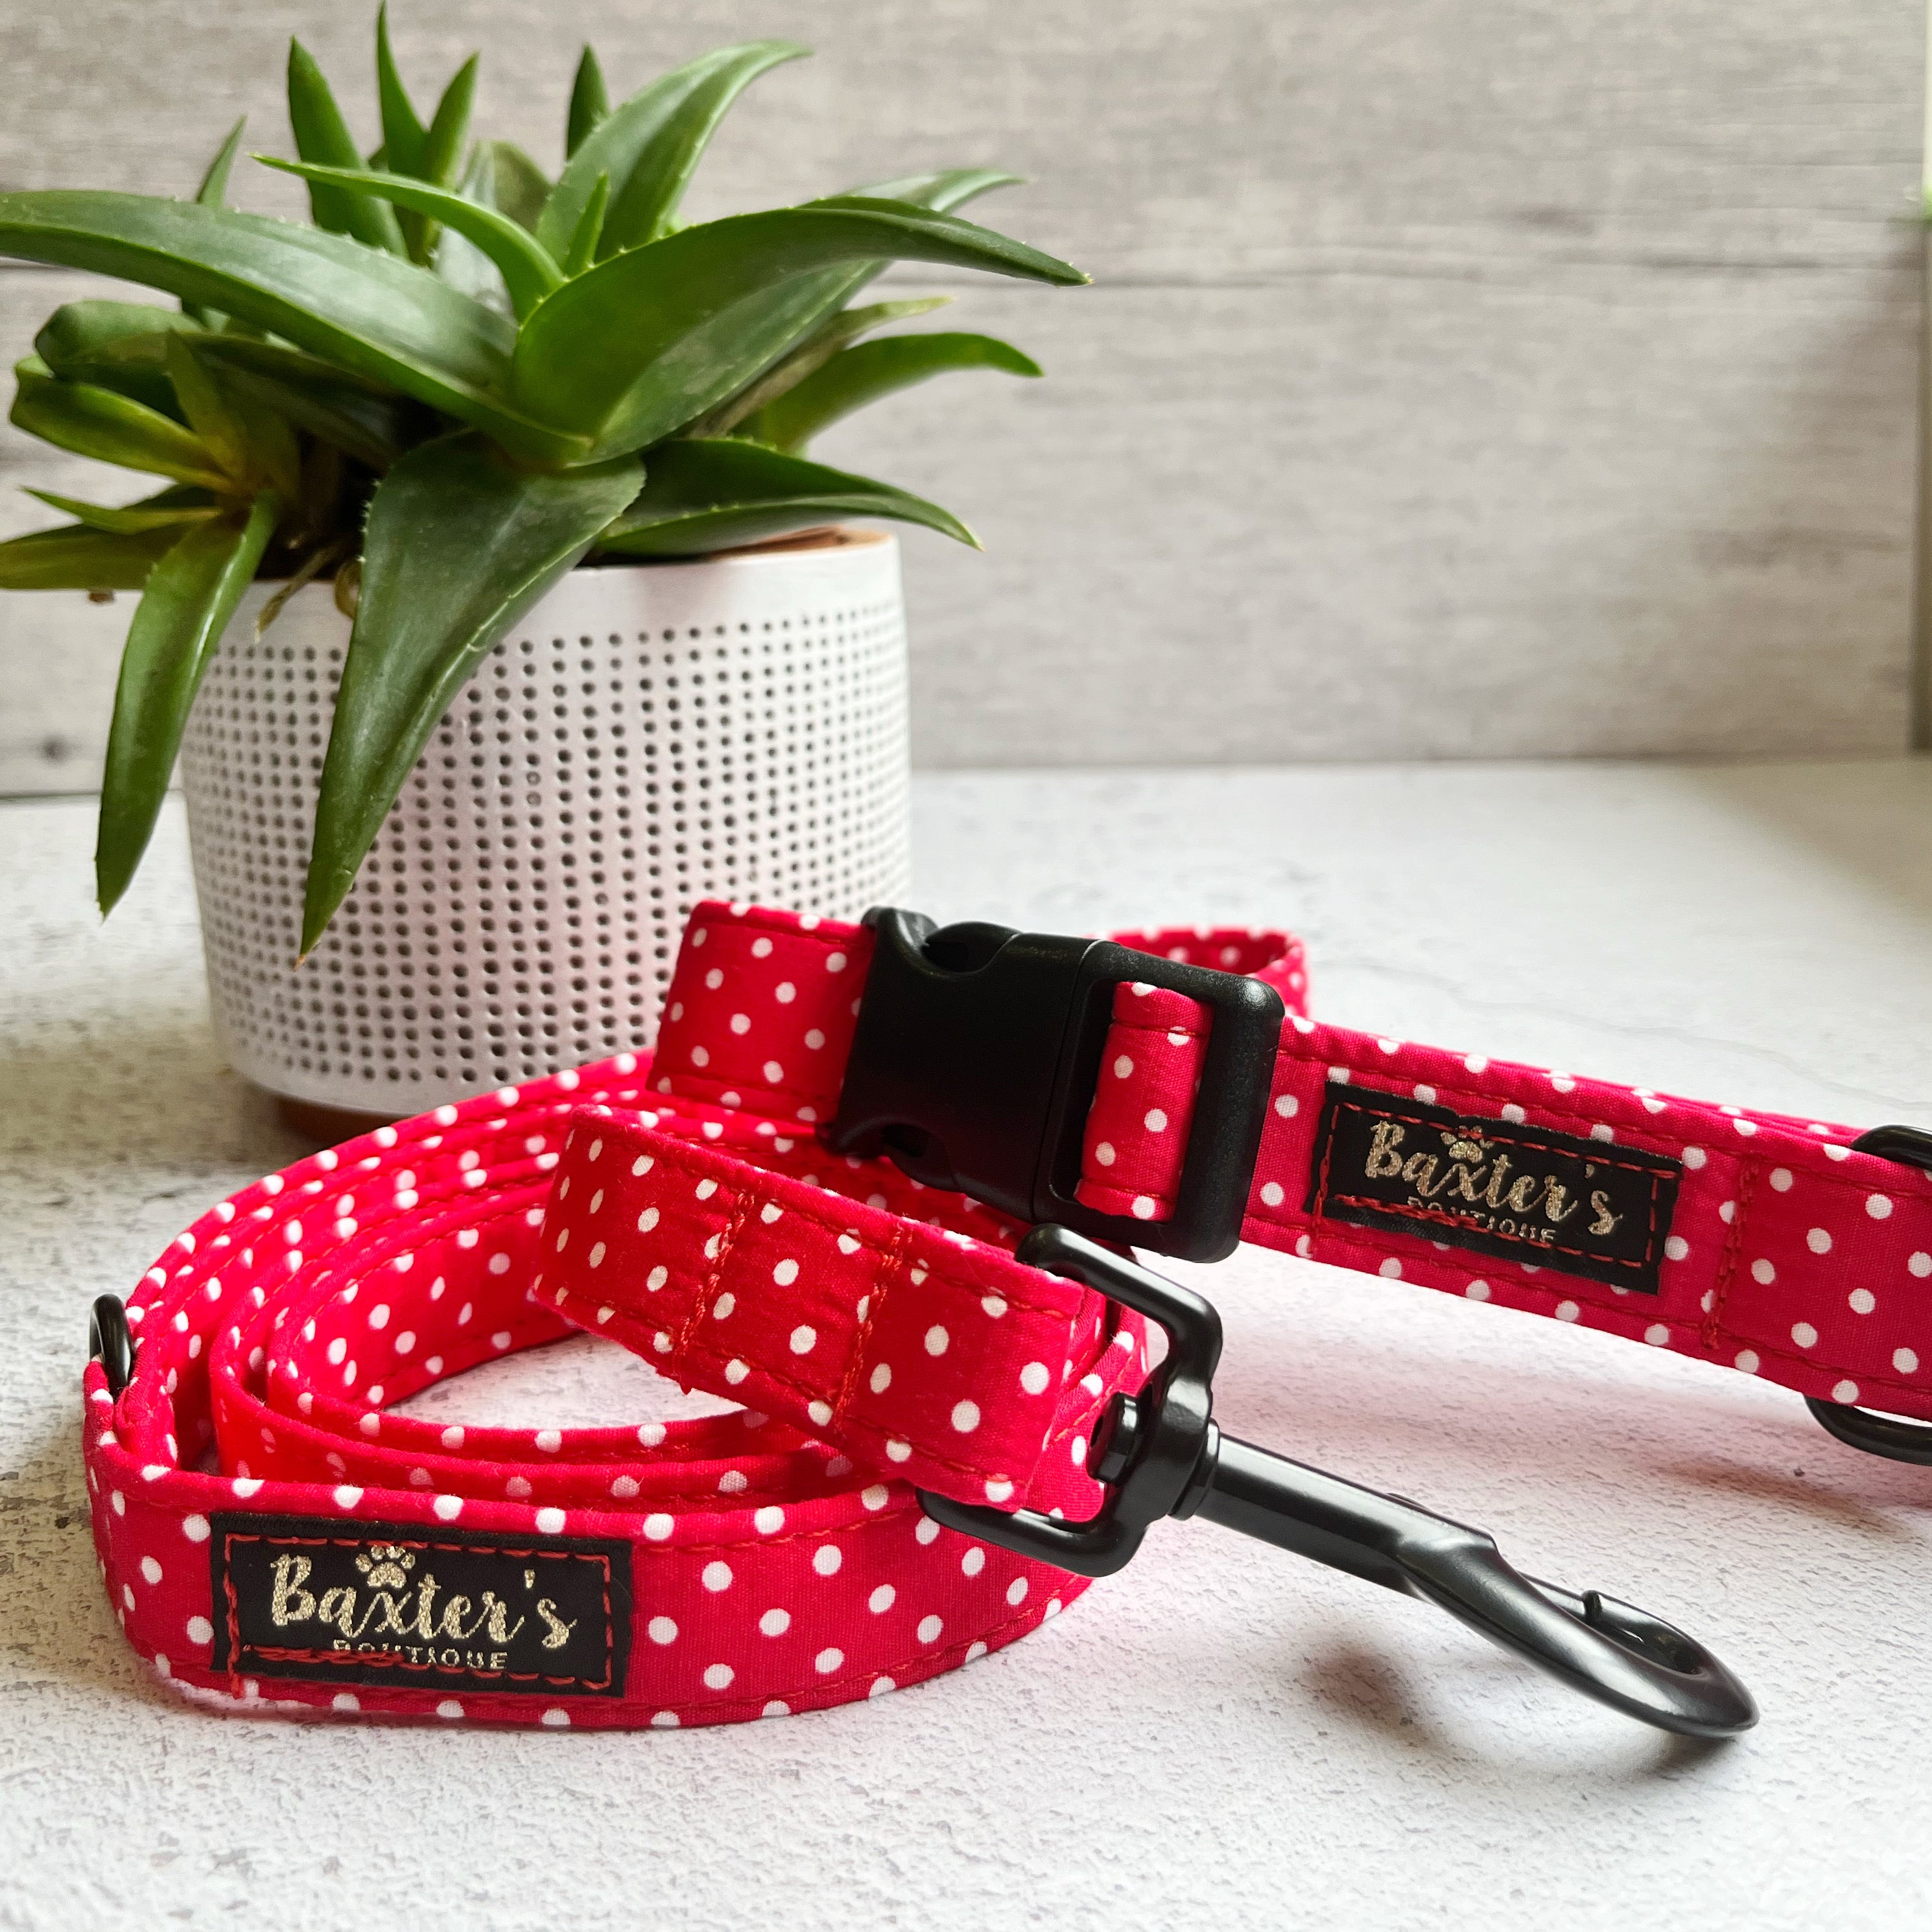 Baxters Boutique | Red Polka Dot Dog Collar